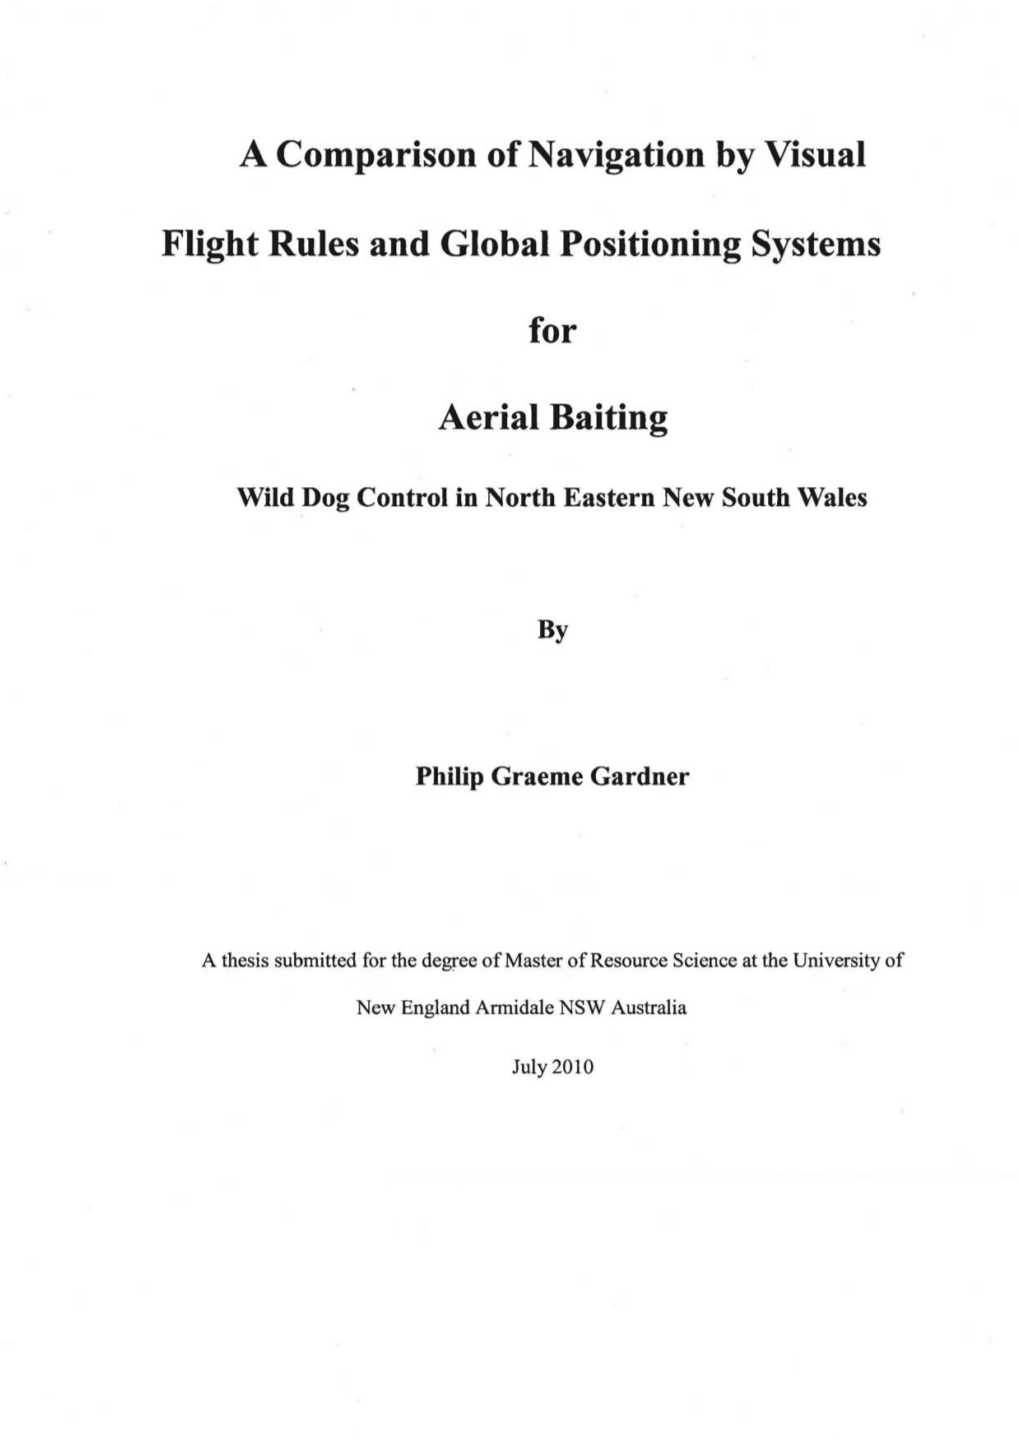 A Comparison of Navigation by Visual Flight Rules and Global Positioning Systems for Aerial Baiting